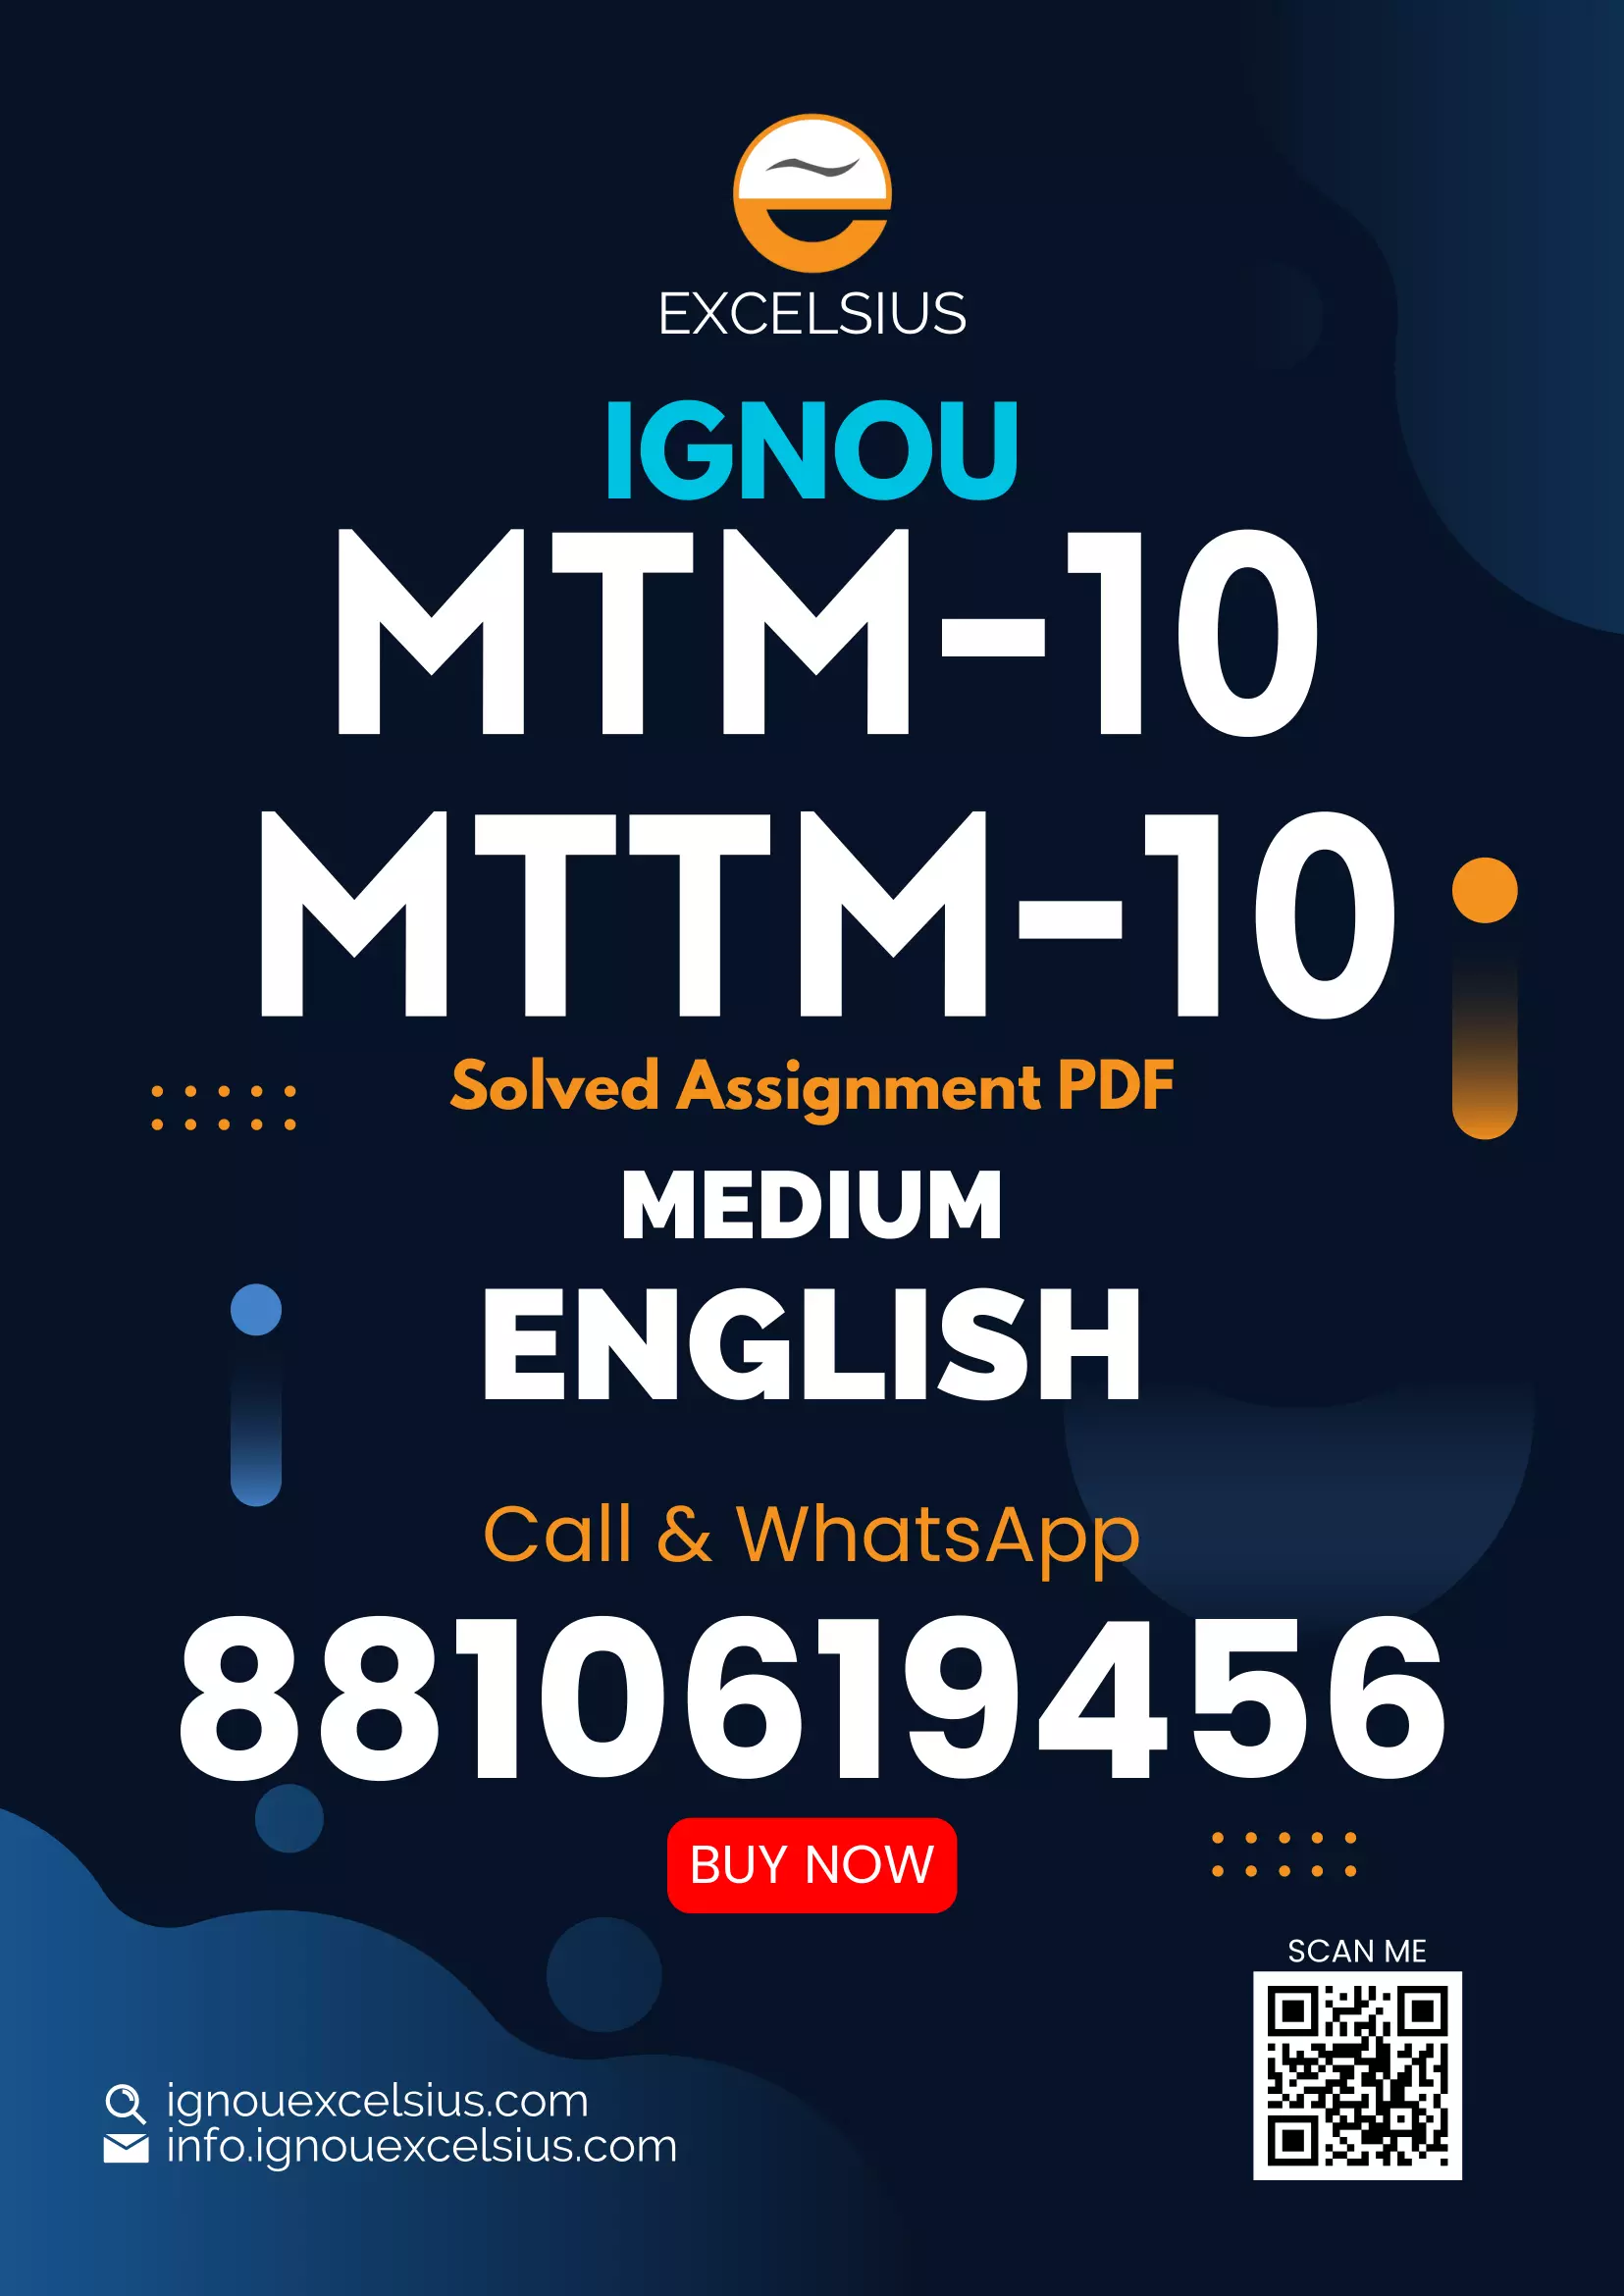 IGNOU MTM-10/MTTM-10 - Tourism Impacts, Latest Solved Assignment-January 2023 - July 2023